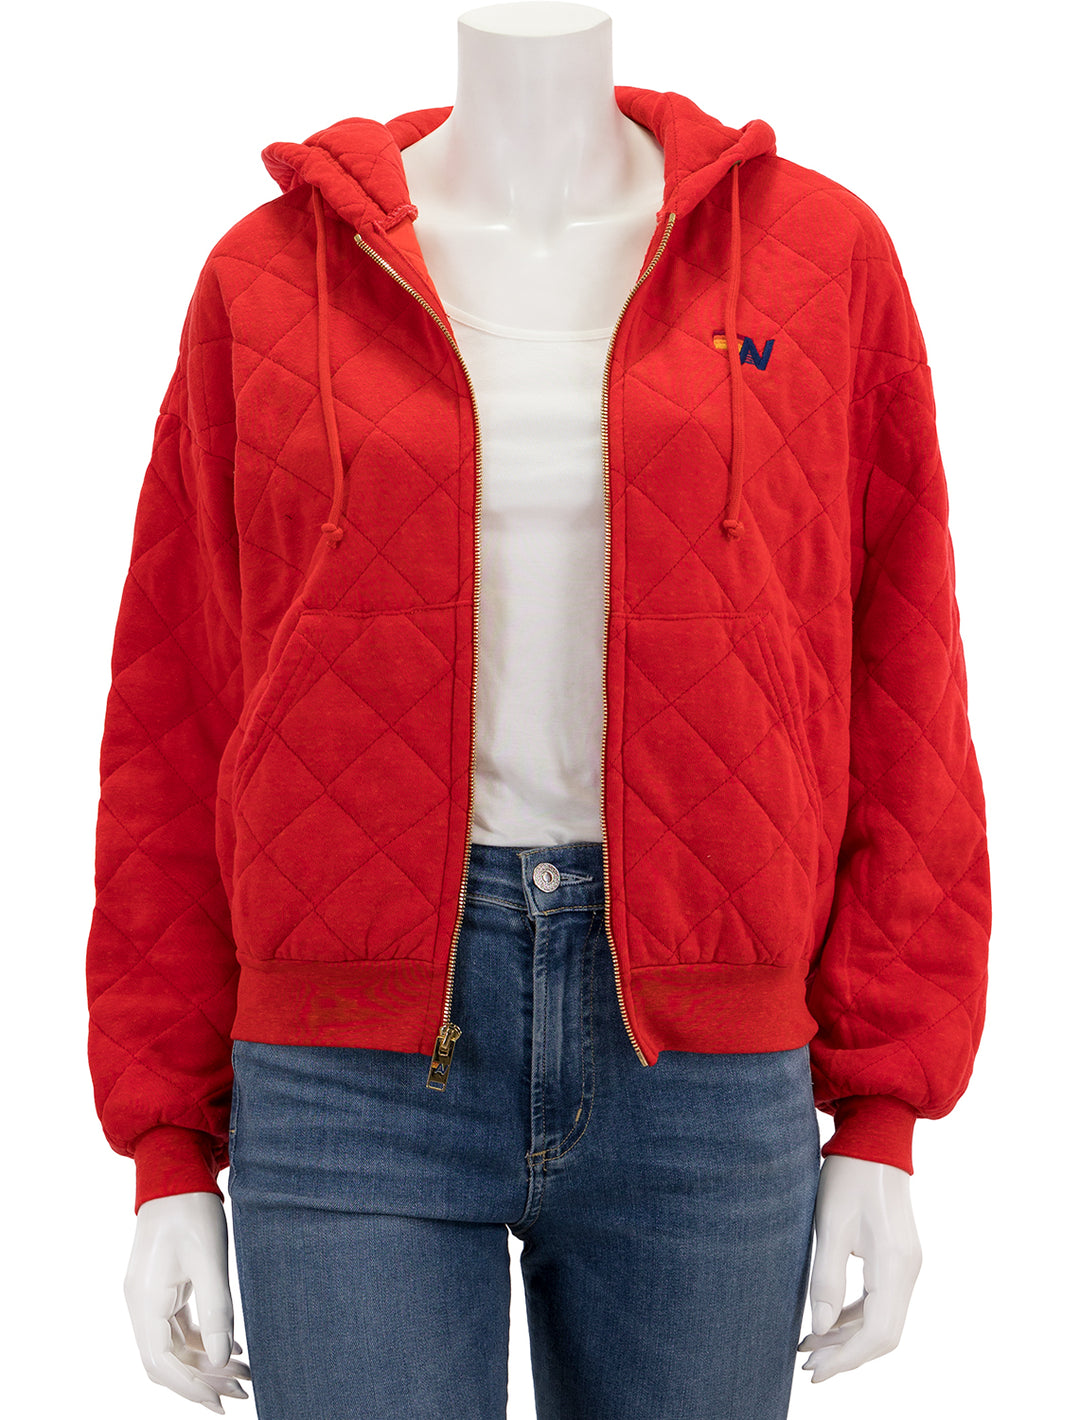 Front view of Aviator Nation's quilted zip hoodie in red, unzipped.